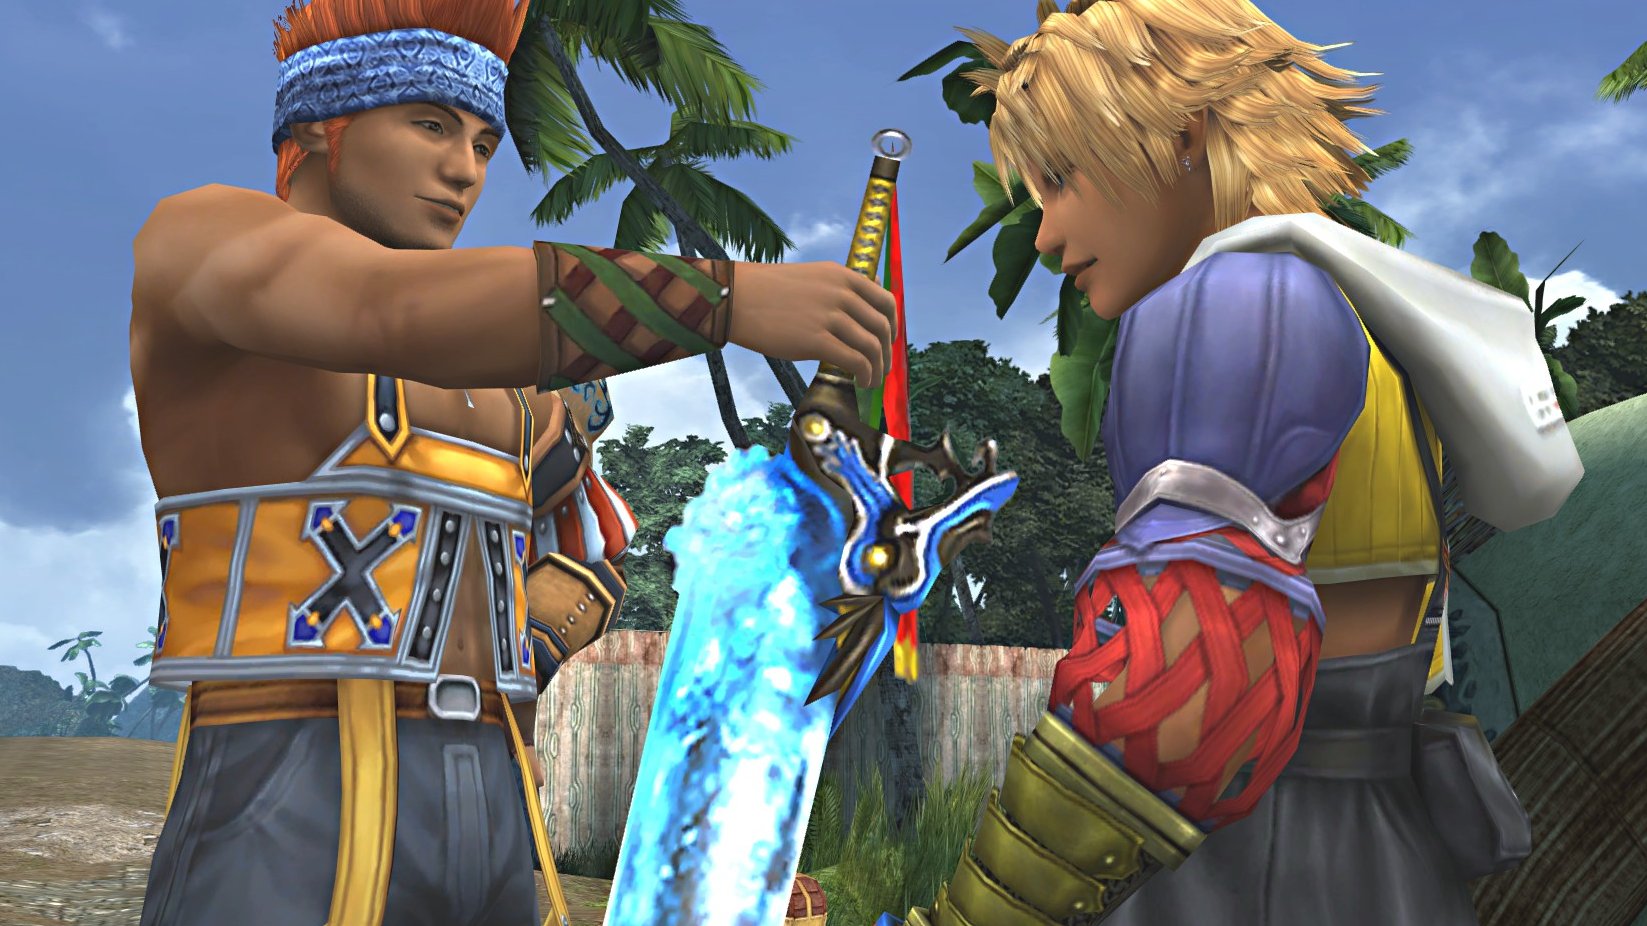 A scene from Final Fantasy X.